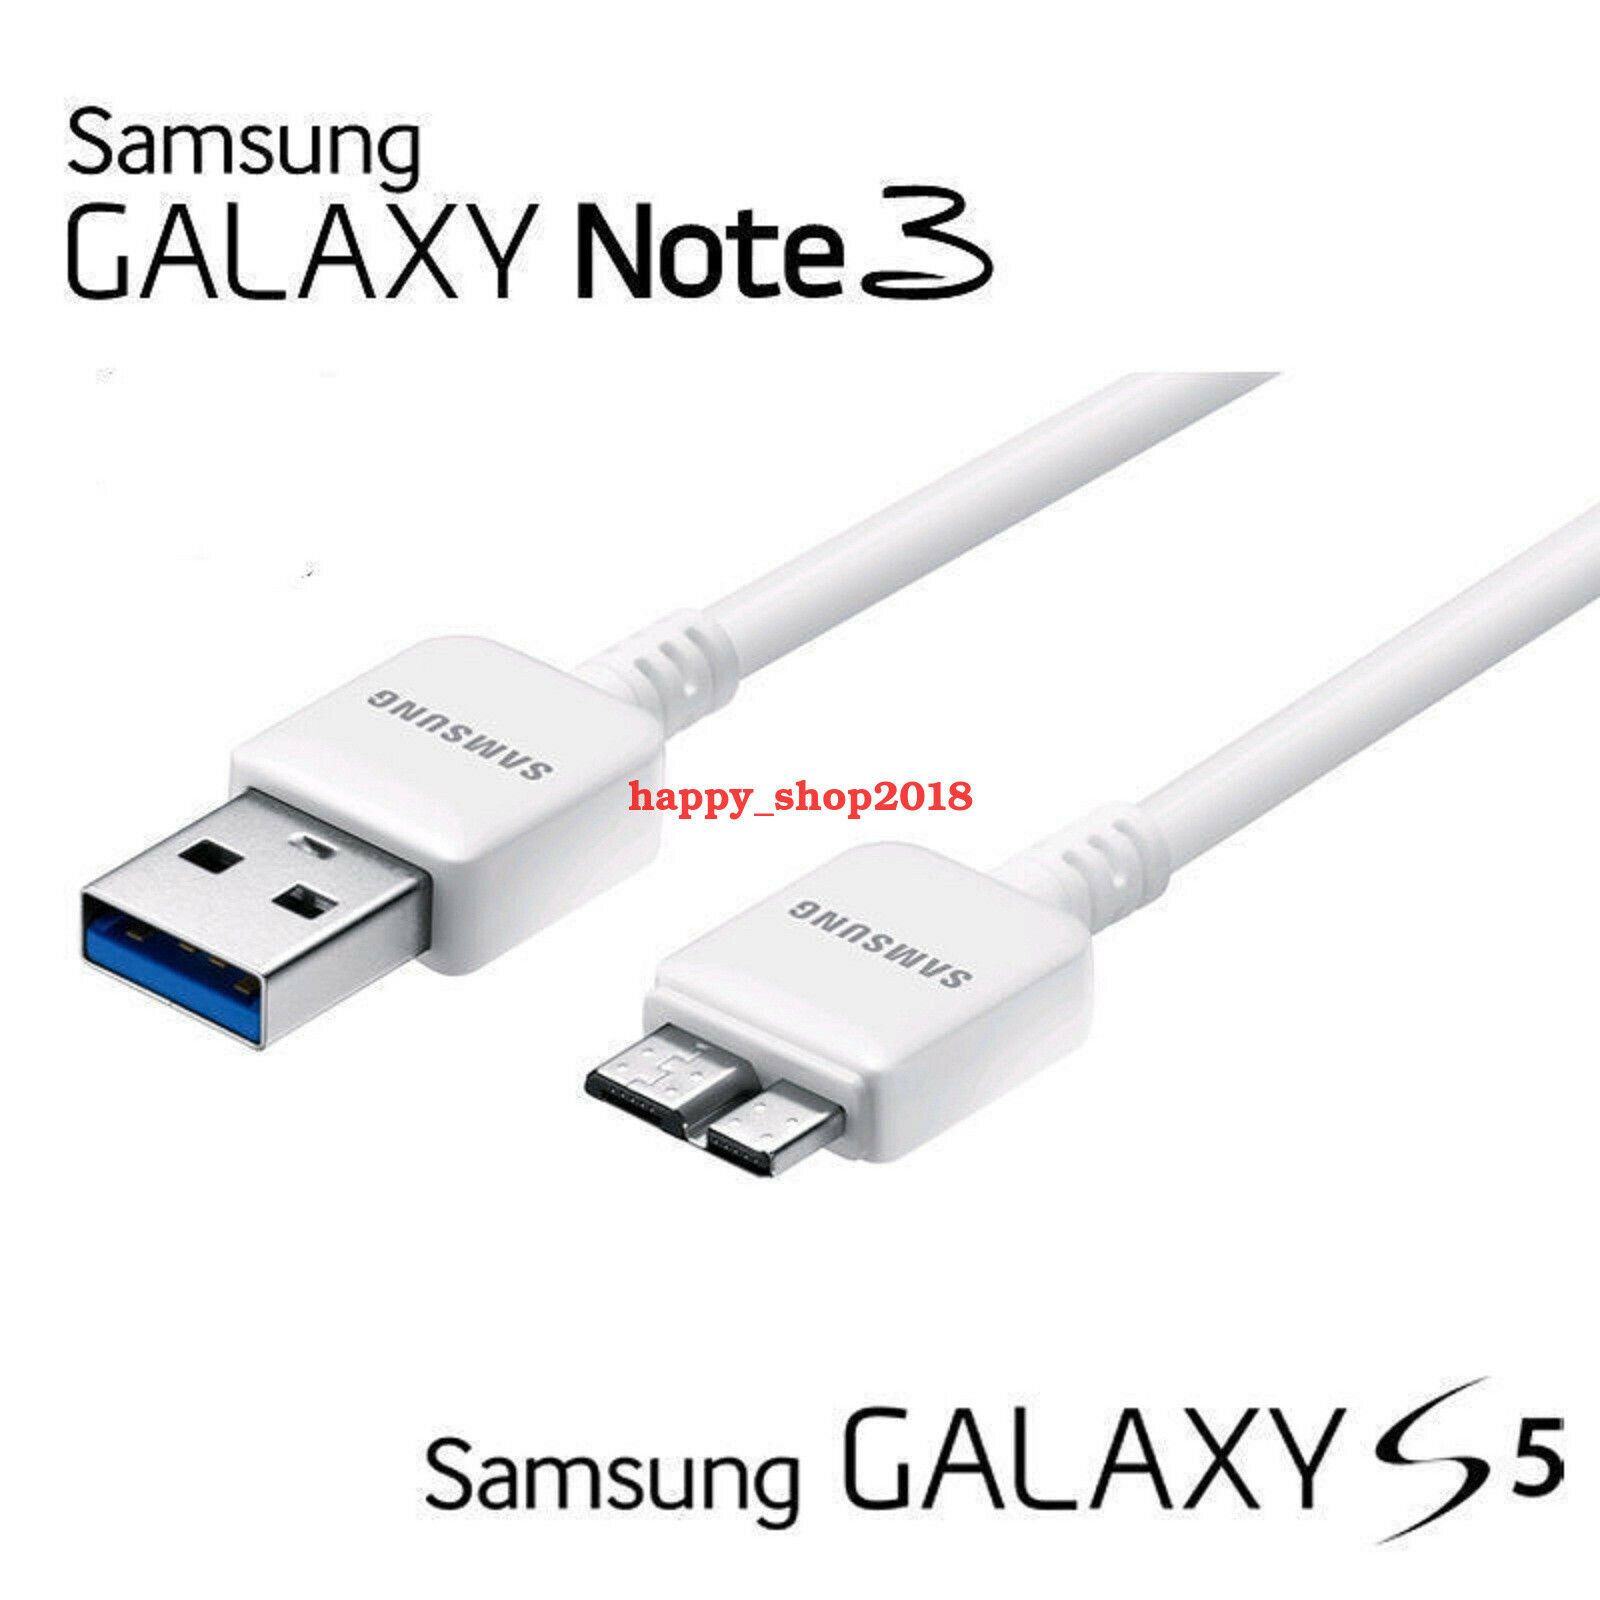 OEM original USB 3.0 Data Charger Cord SYNC Cable for Samsung Galaxy S5 Note 3 New USB 3.0 Data Sync Charger